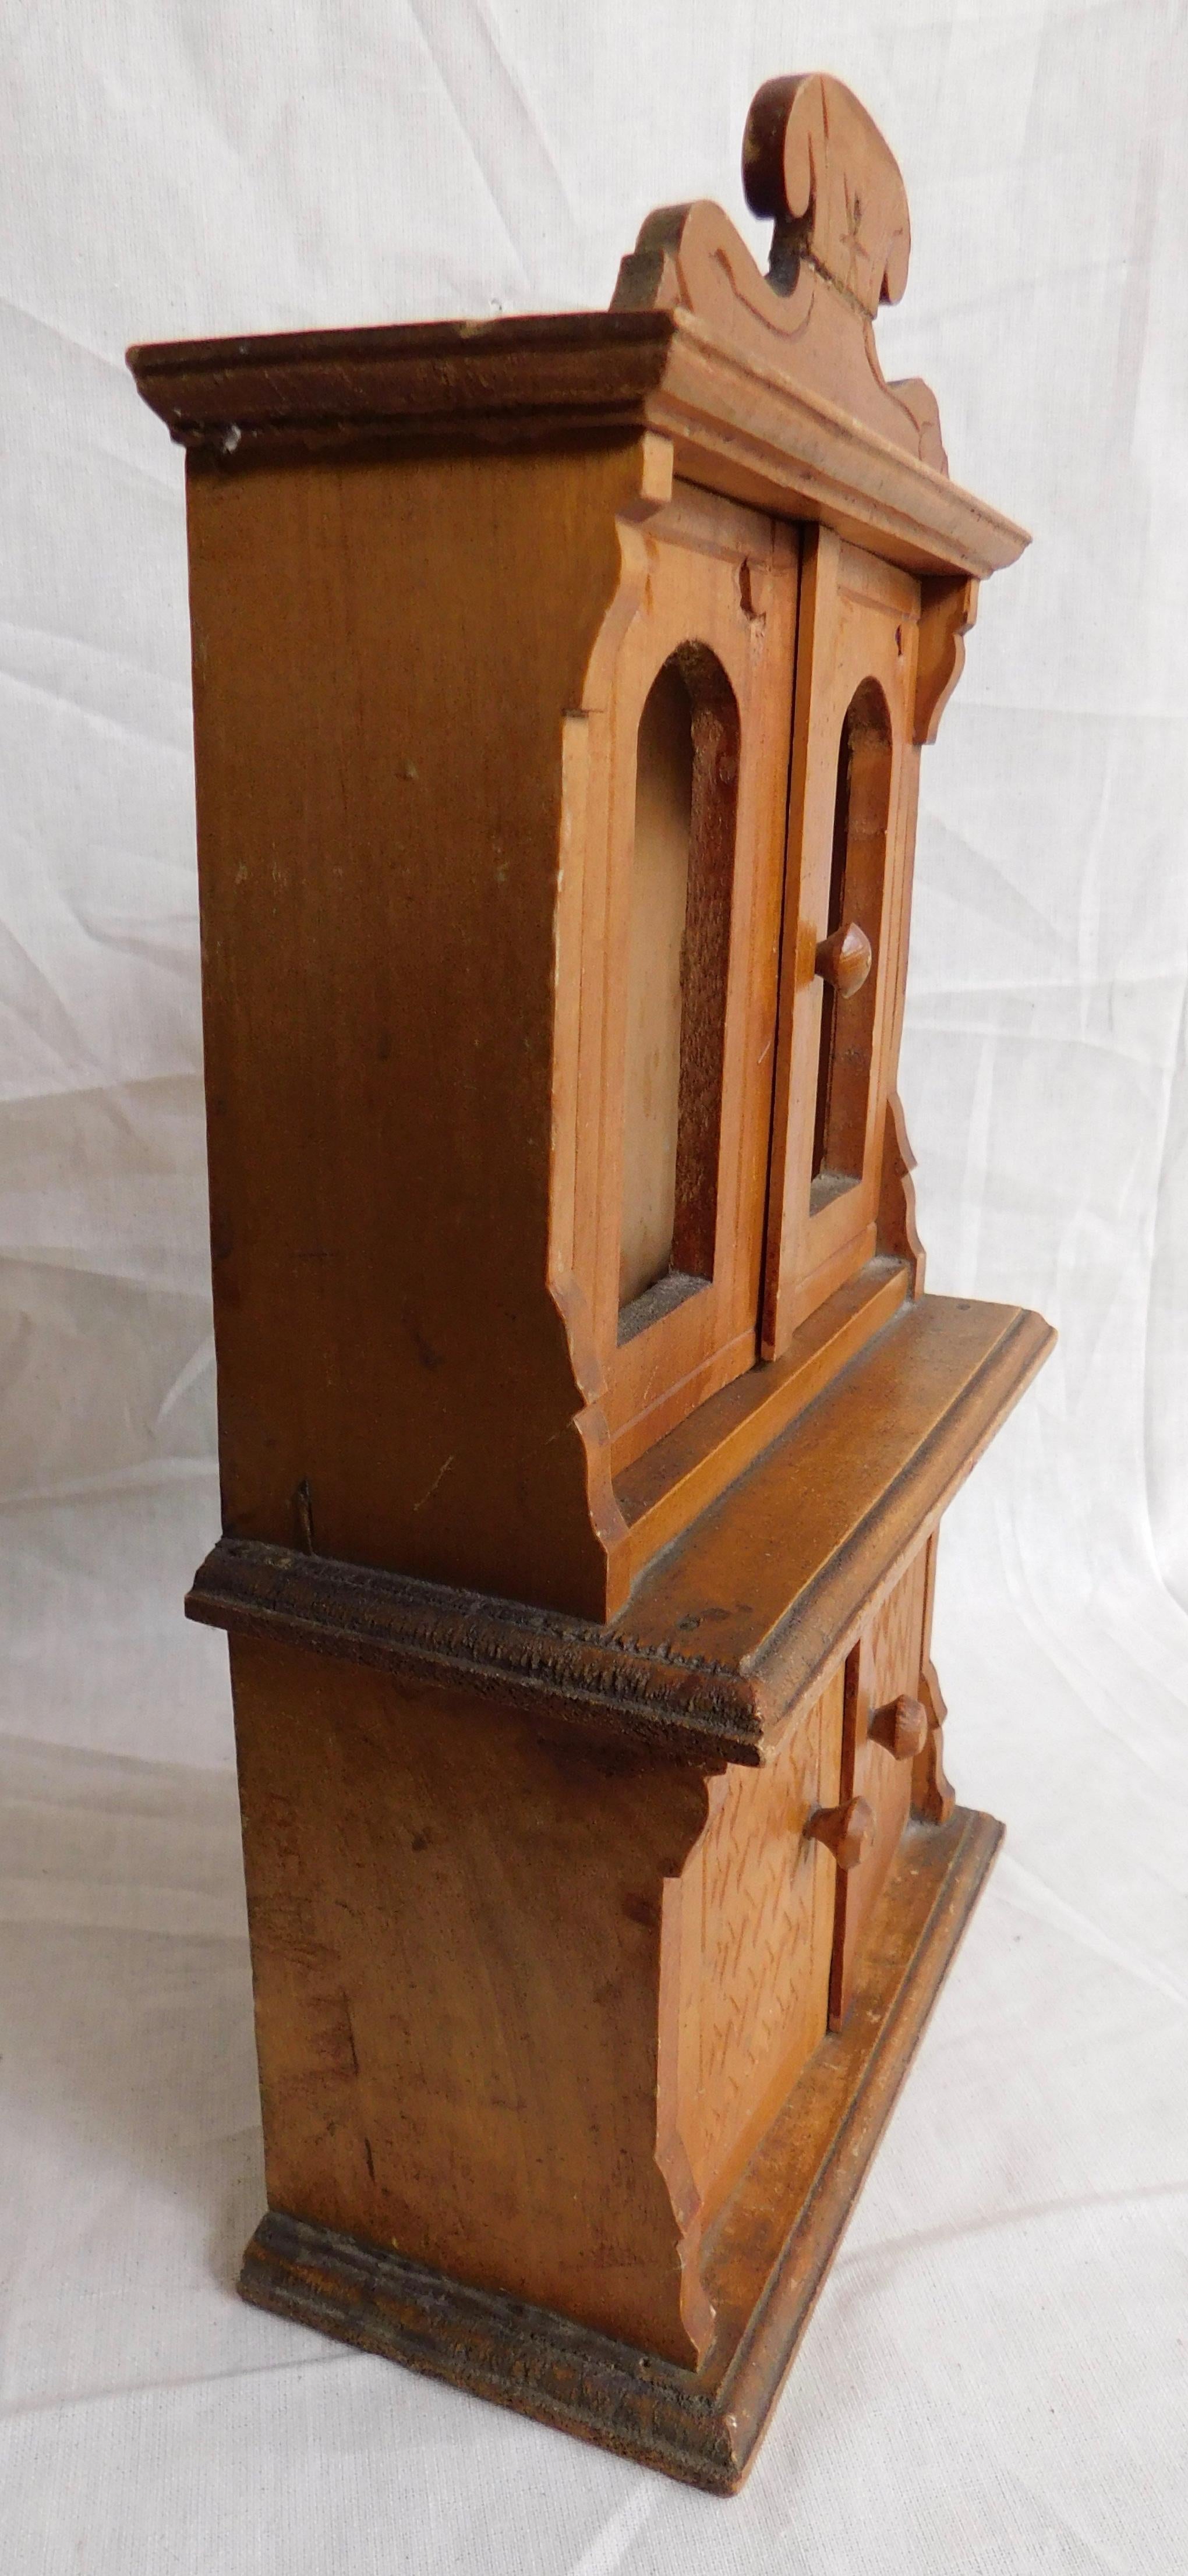 Miniature French cabinet, circa 1900. Top and bottom doors open.